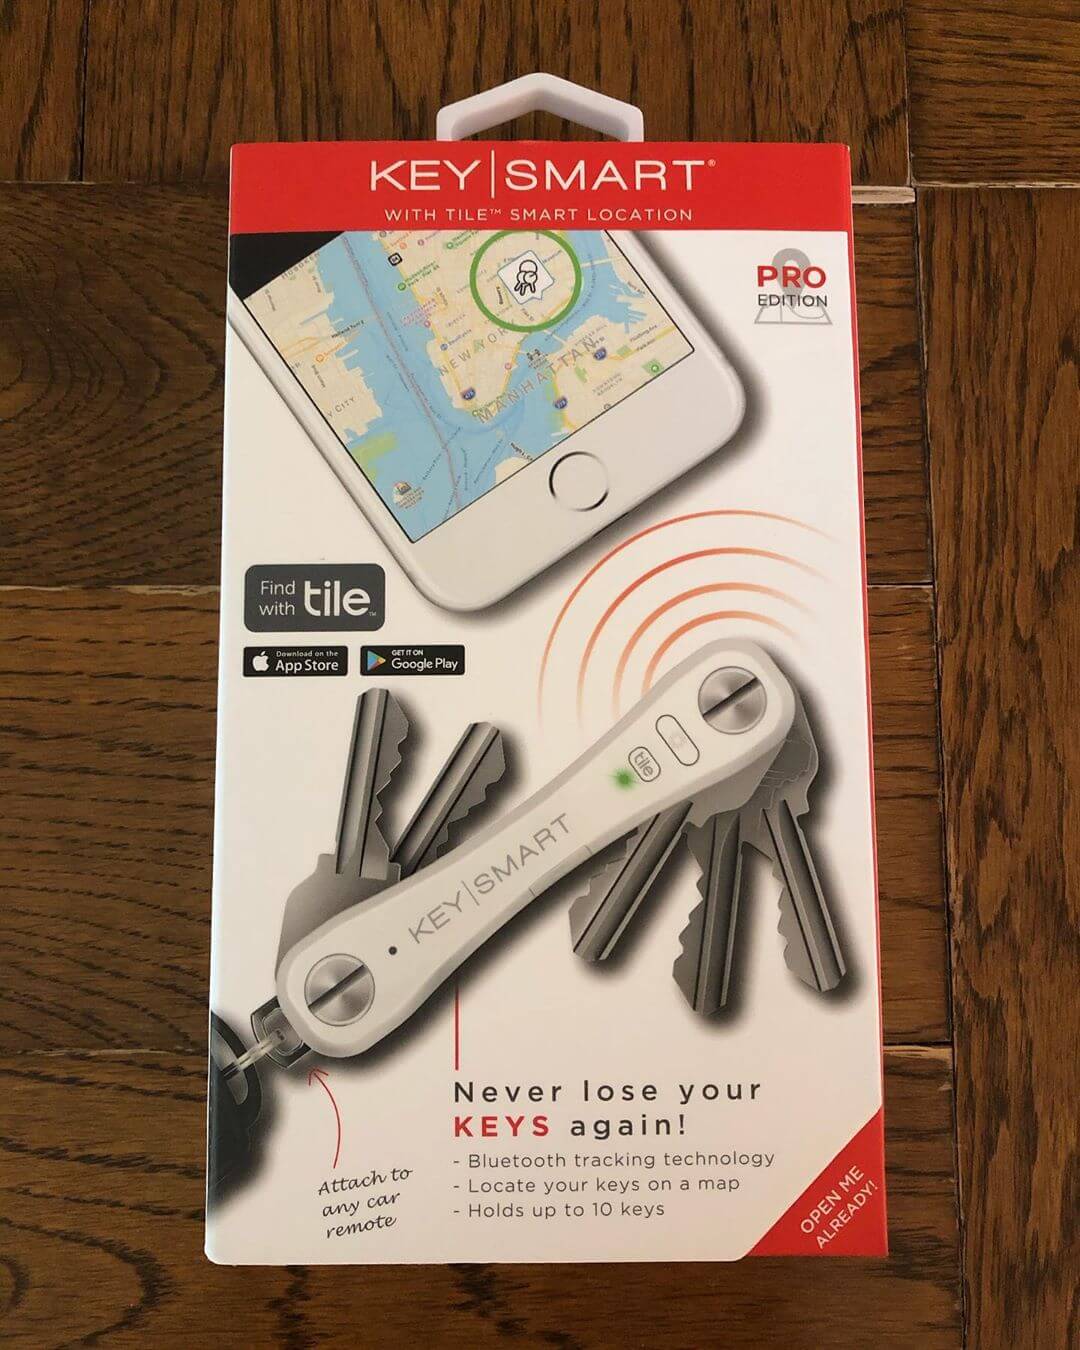 The KeySmart Pro packaging, which you can review for yourself or get the KeySmart Rugged